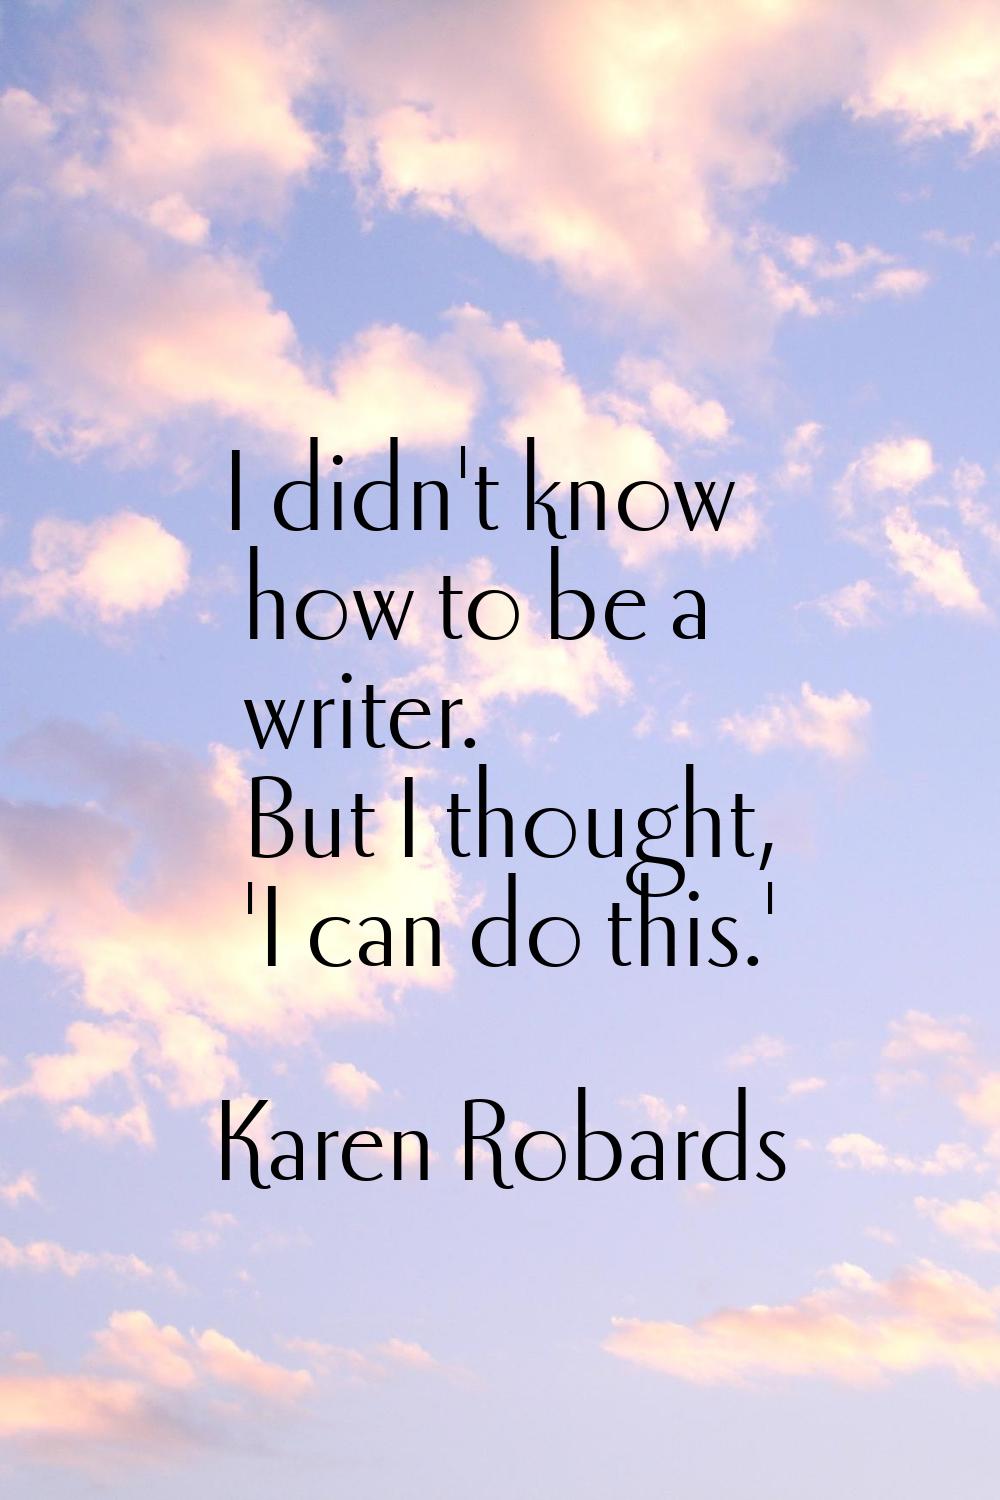 I didn't know how to be a writer. But I thought, 'I can do this.'